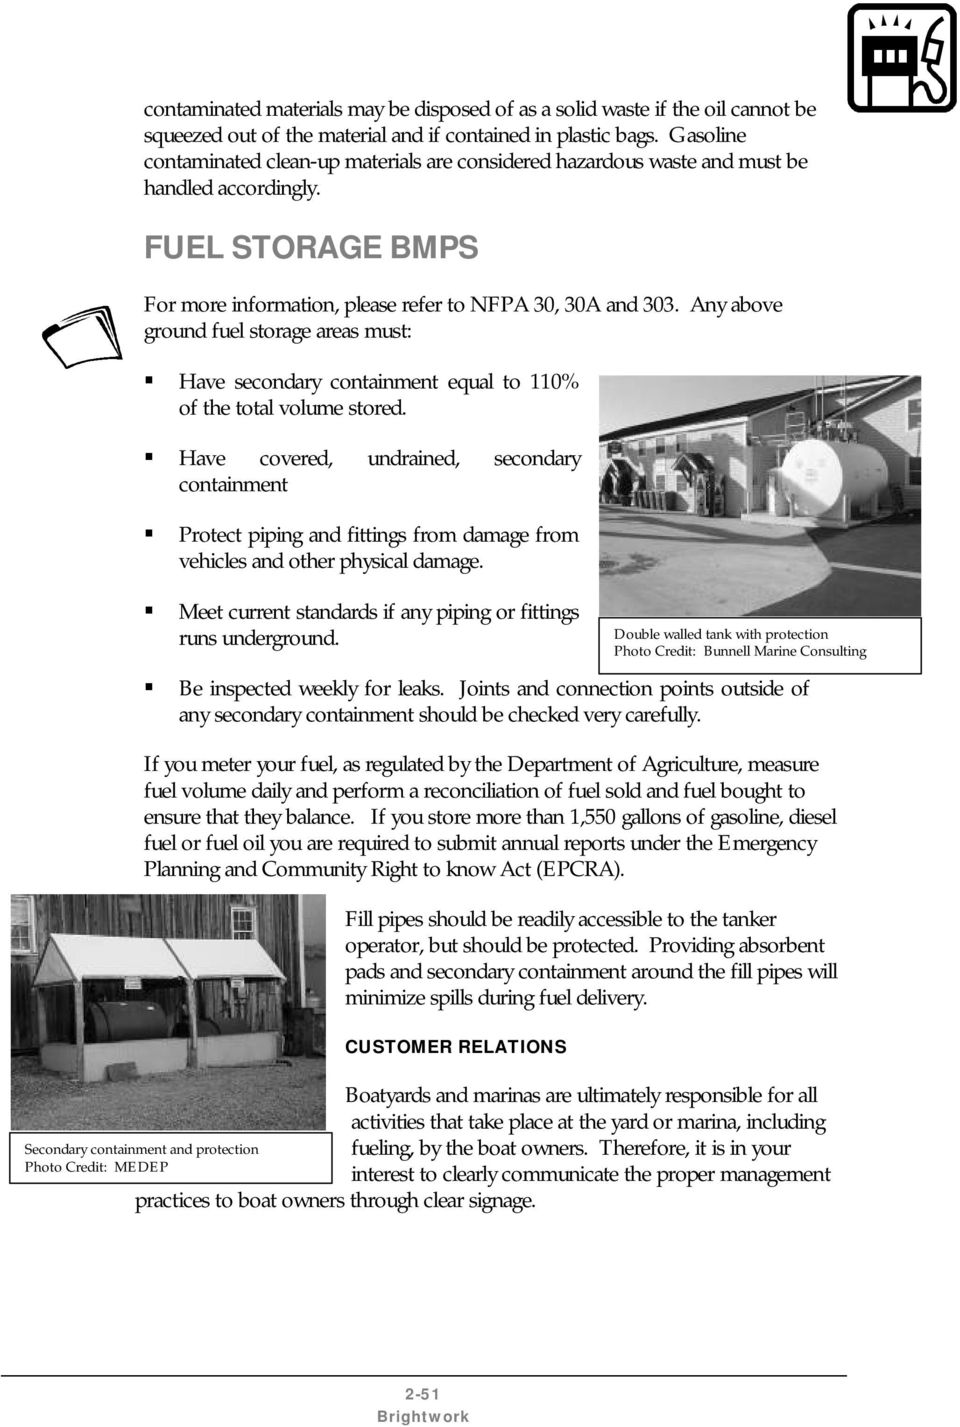 Any above ground fuel storage areas must: Have secondary containment equal to 110% of the total volume stored.